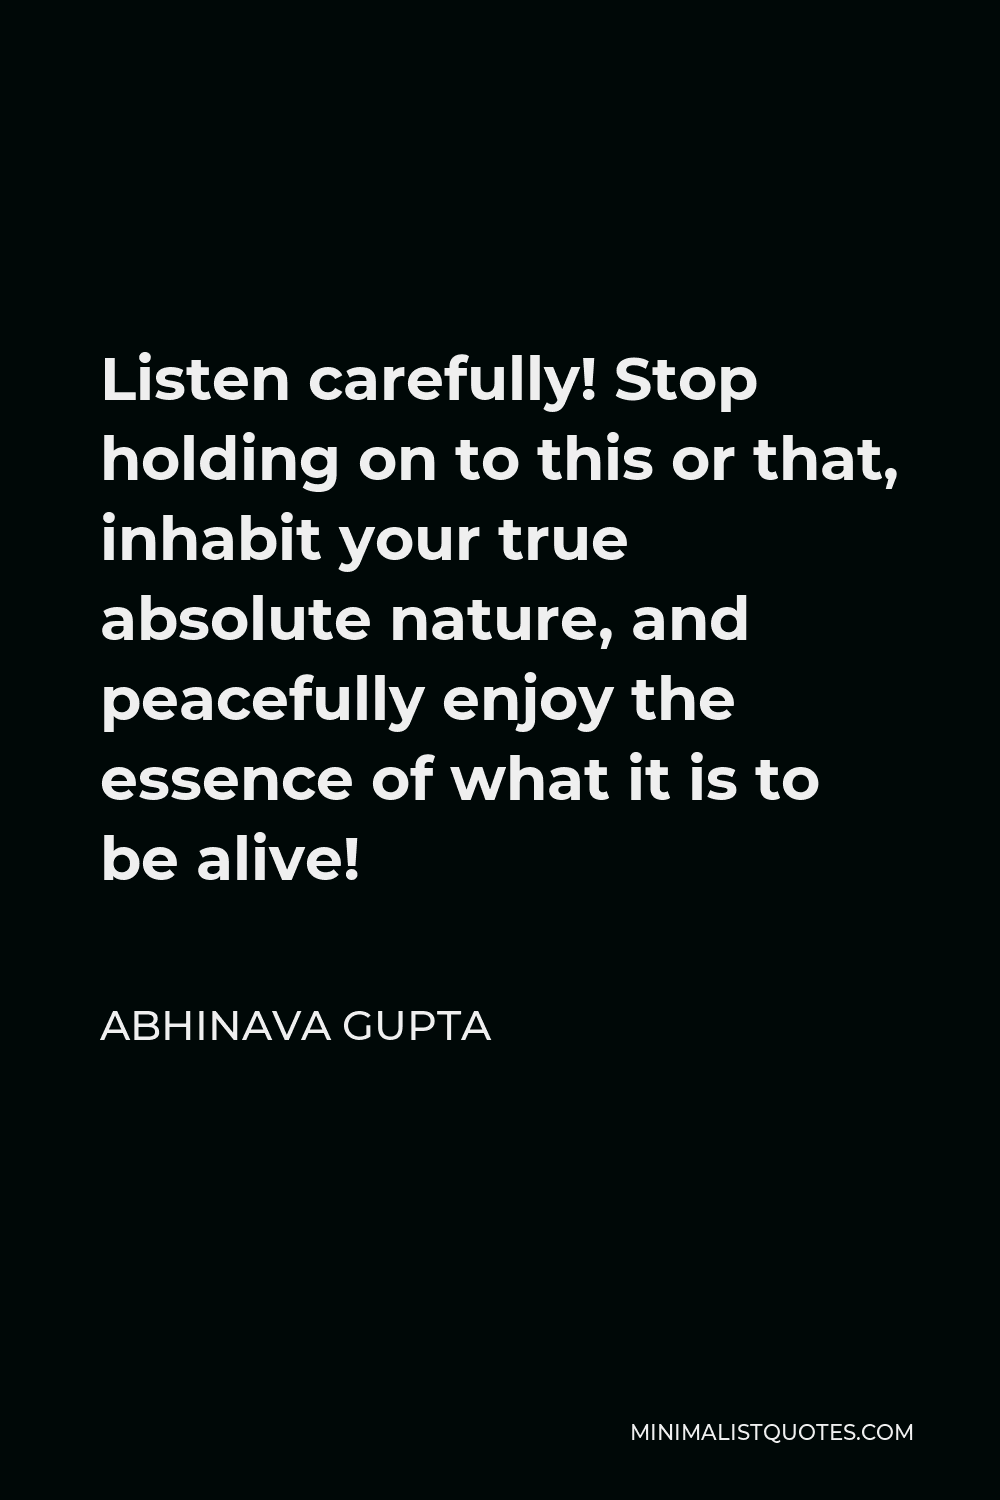 Abhinava Gupta Quote - Listen carefully! Stop holding on to this or that, inhabit your true absolute nature, and peacefully enjoy the essence of what it is to be alive!